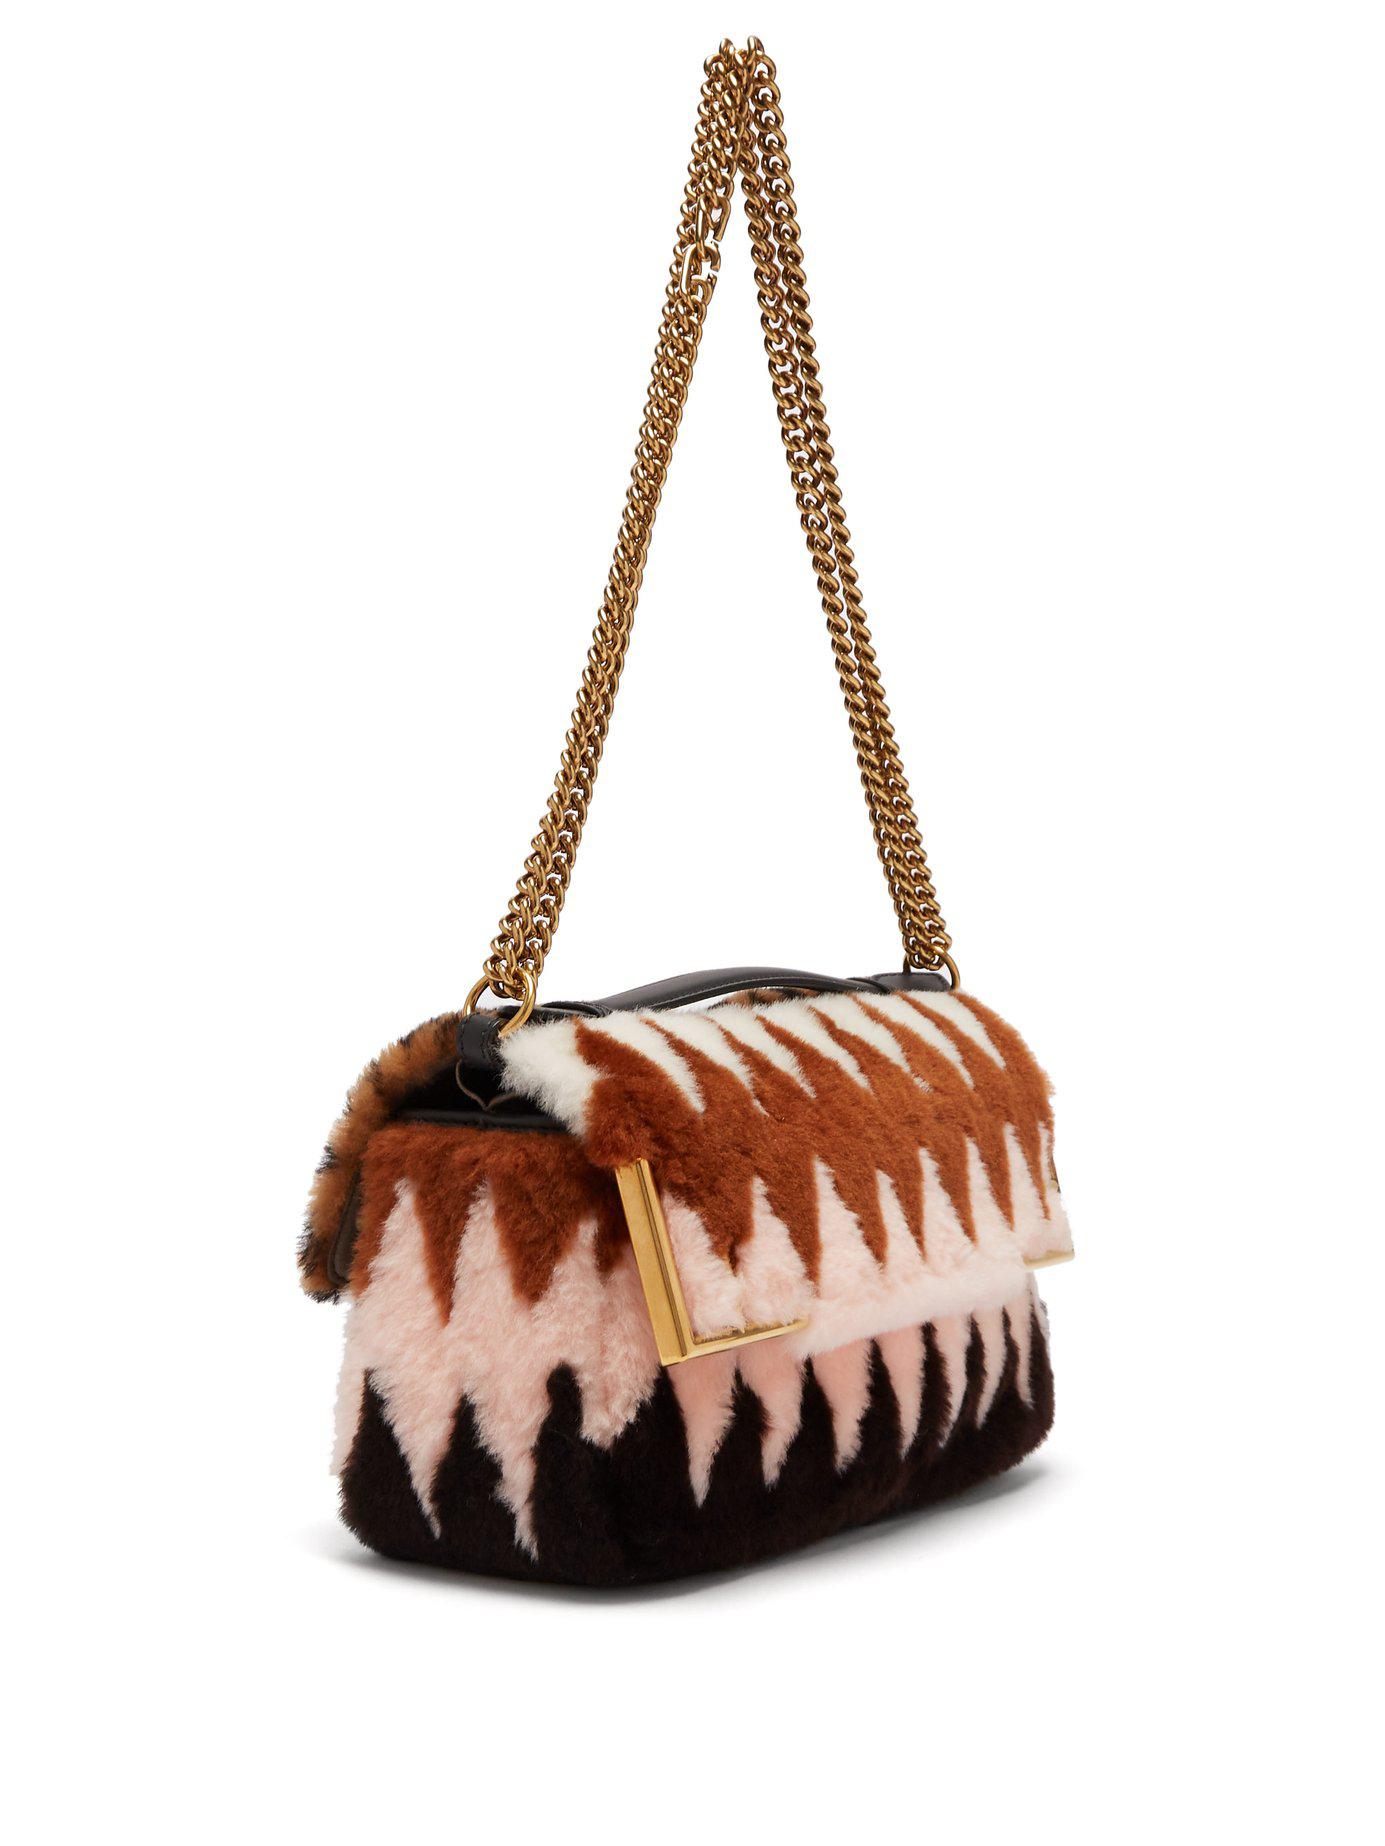 Fendi Leather Double Baguette Logo Shearling Bag in Brown - Lyst